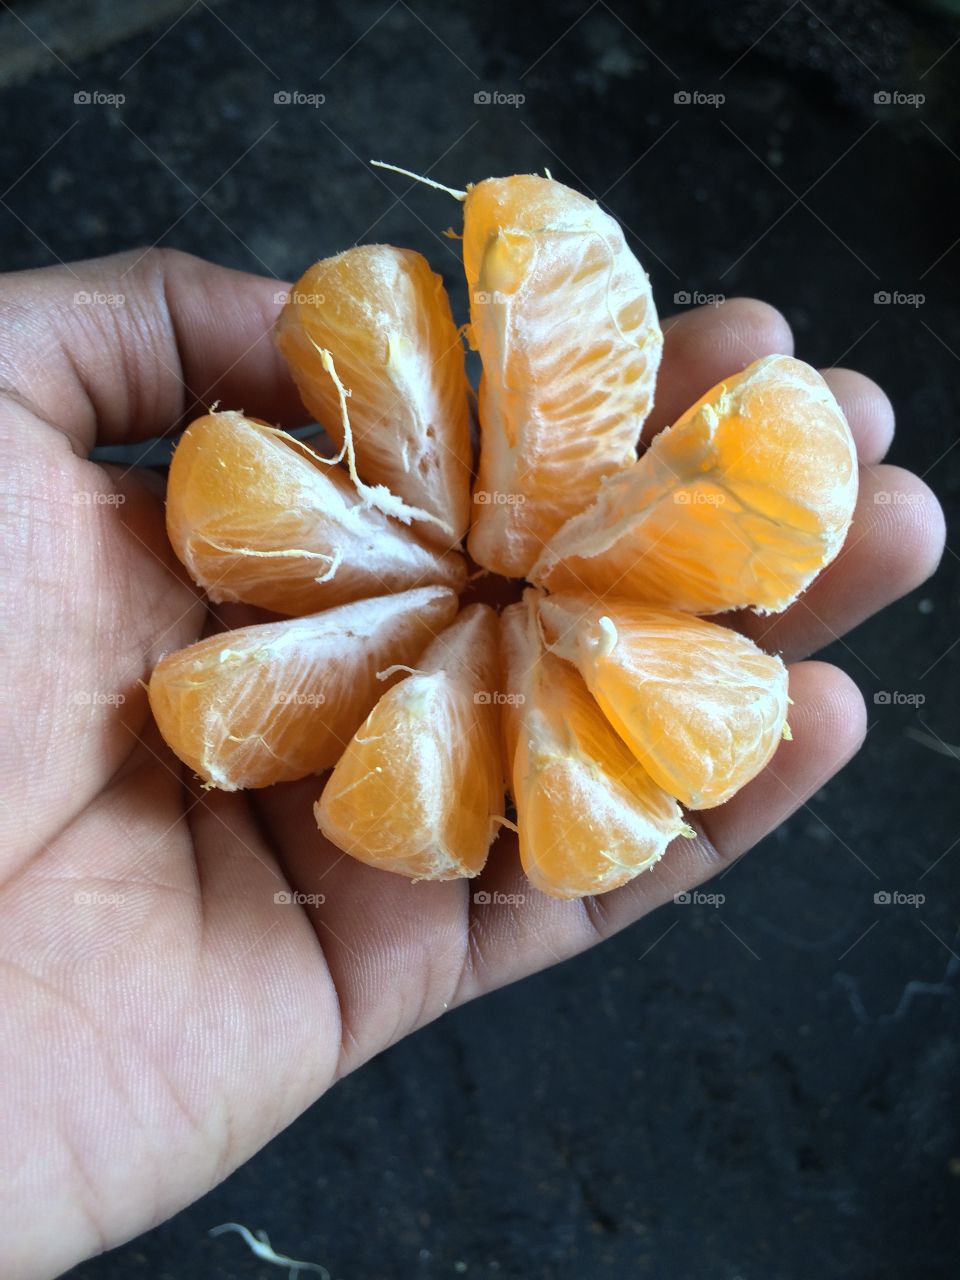 Close-up of a person's hands holding an orange